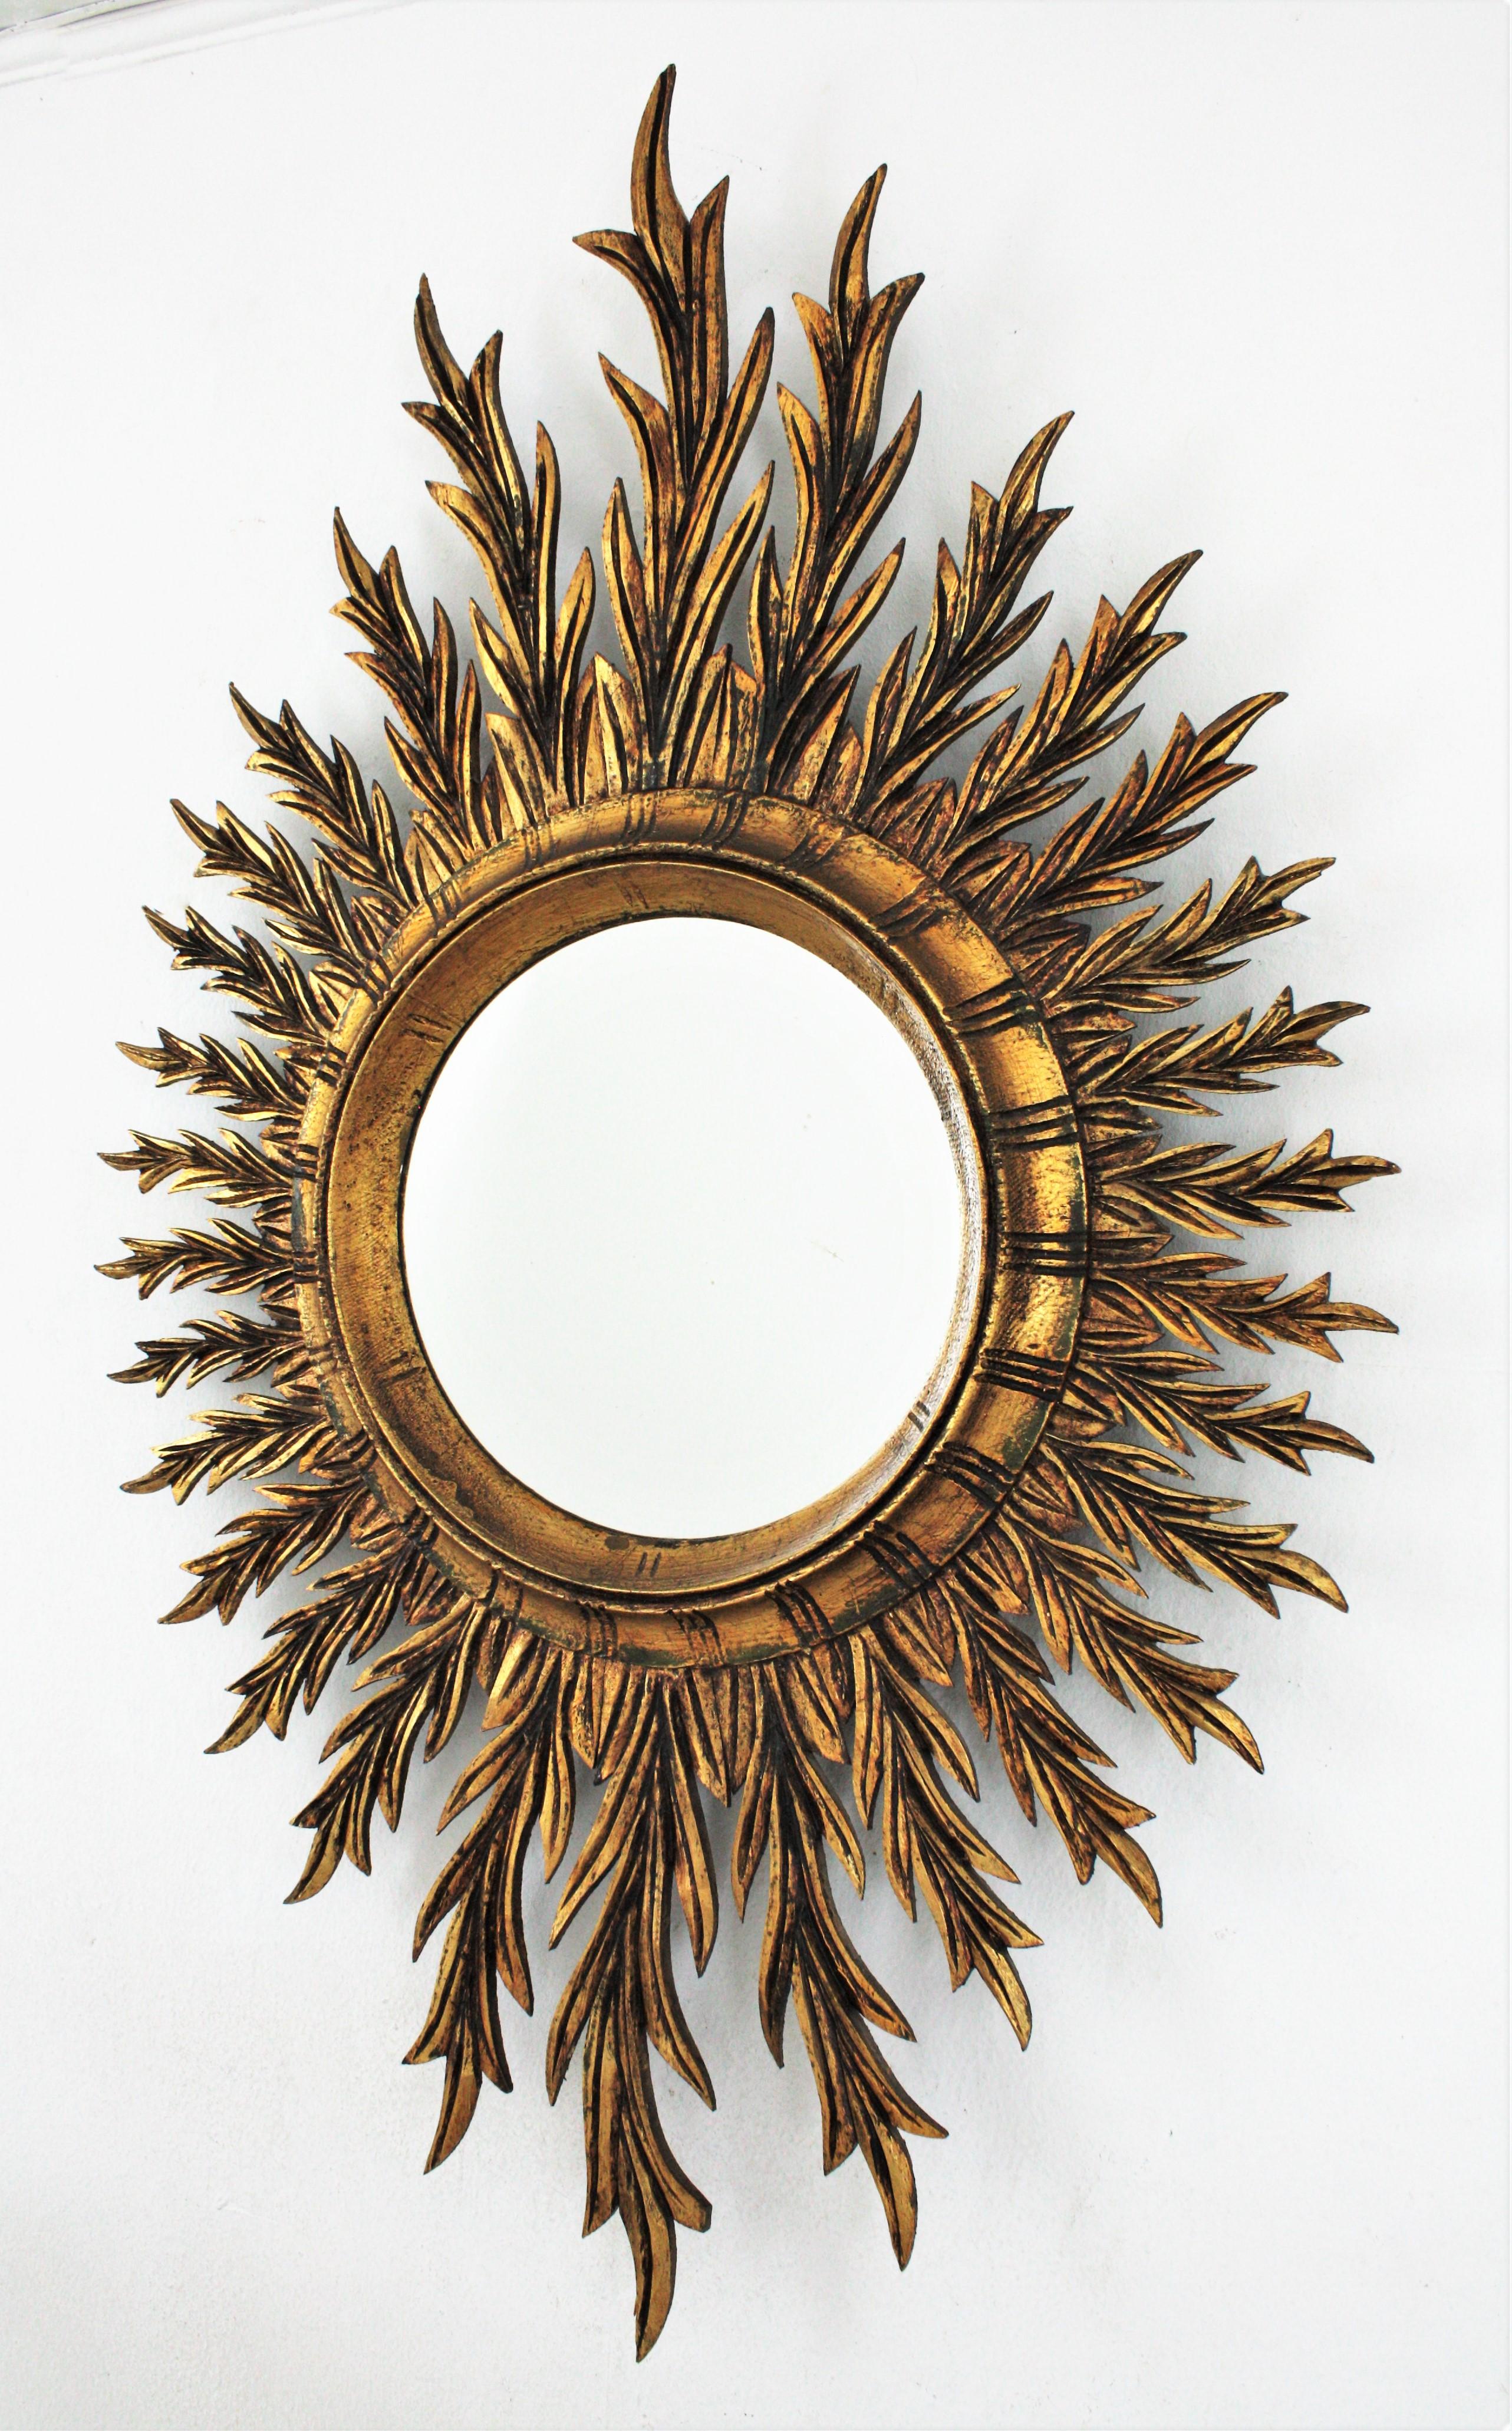 Large Spanish Sunburst Oval Mirror in Giltwood, 1950s
An amazing finely carved giltwood oval shaped starburst /sunburst mirror with gold leaf finish in the style of Hollywood Regency, Spain, 1950s-1960s.
This mirror has a richly carved frame with